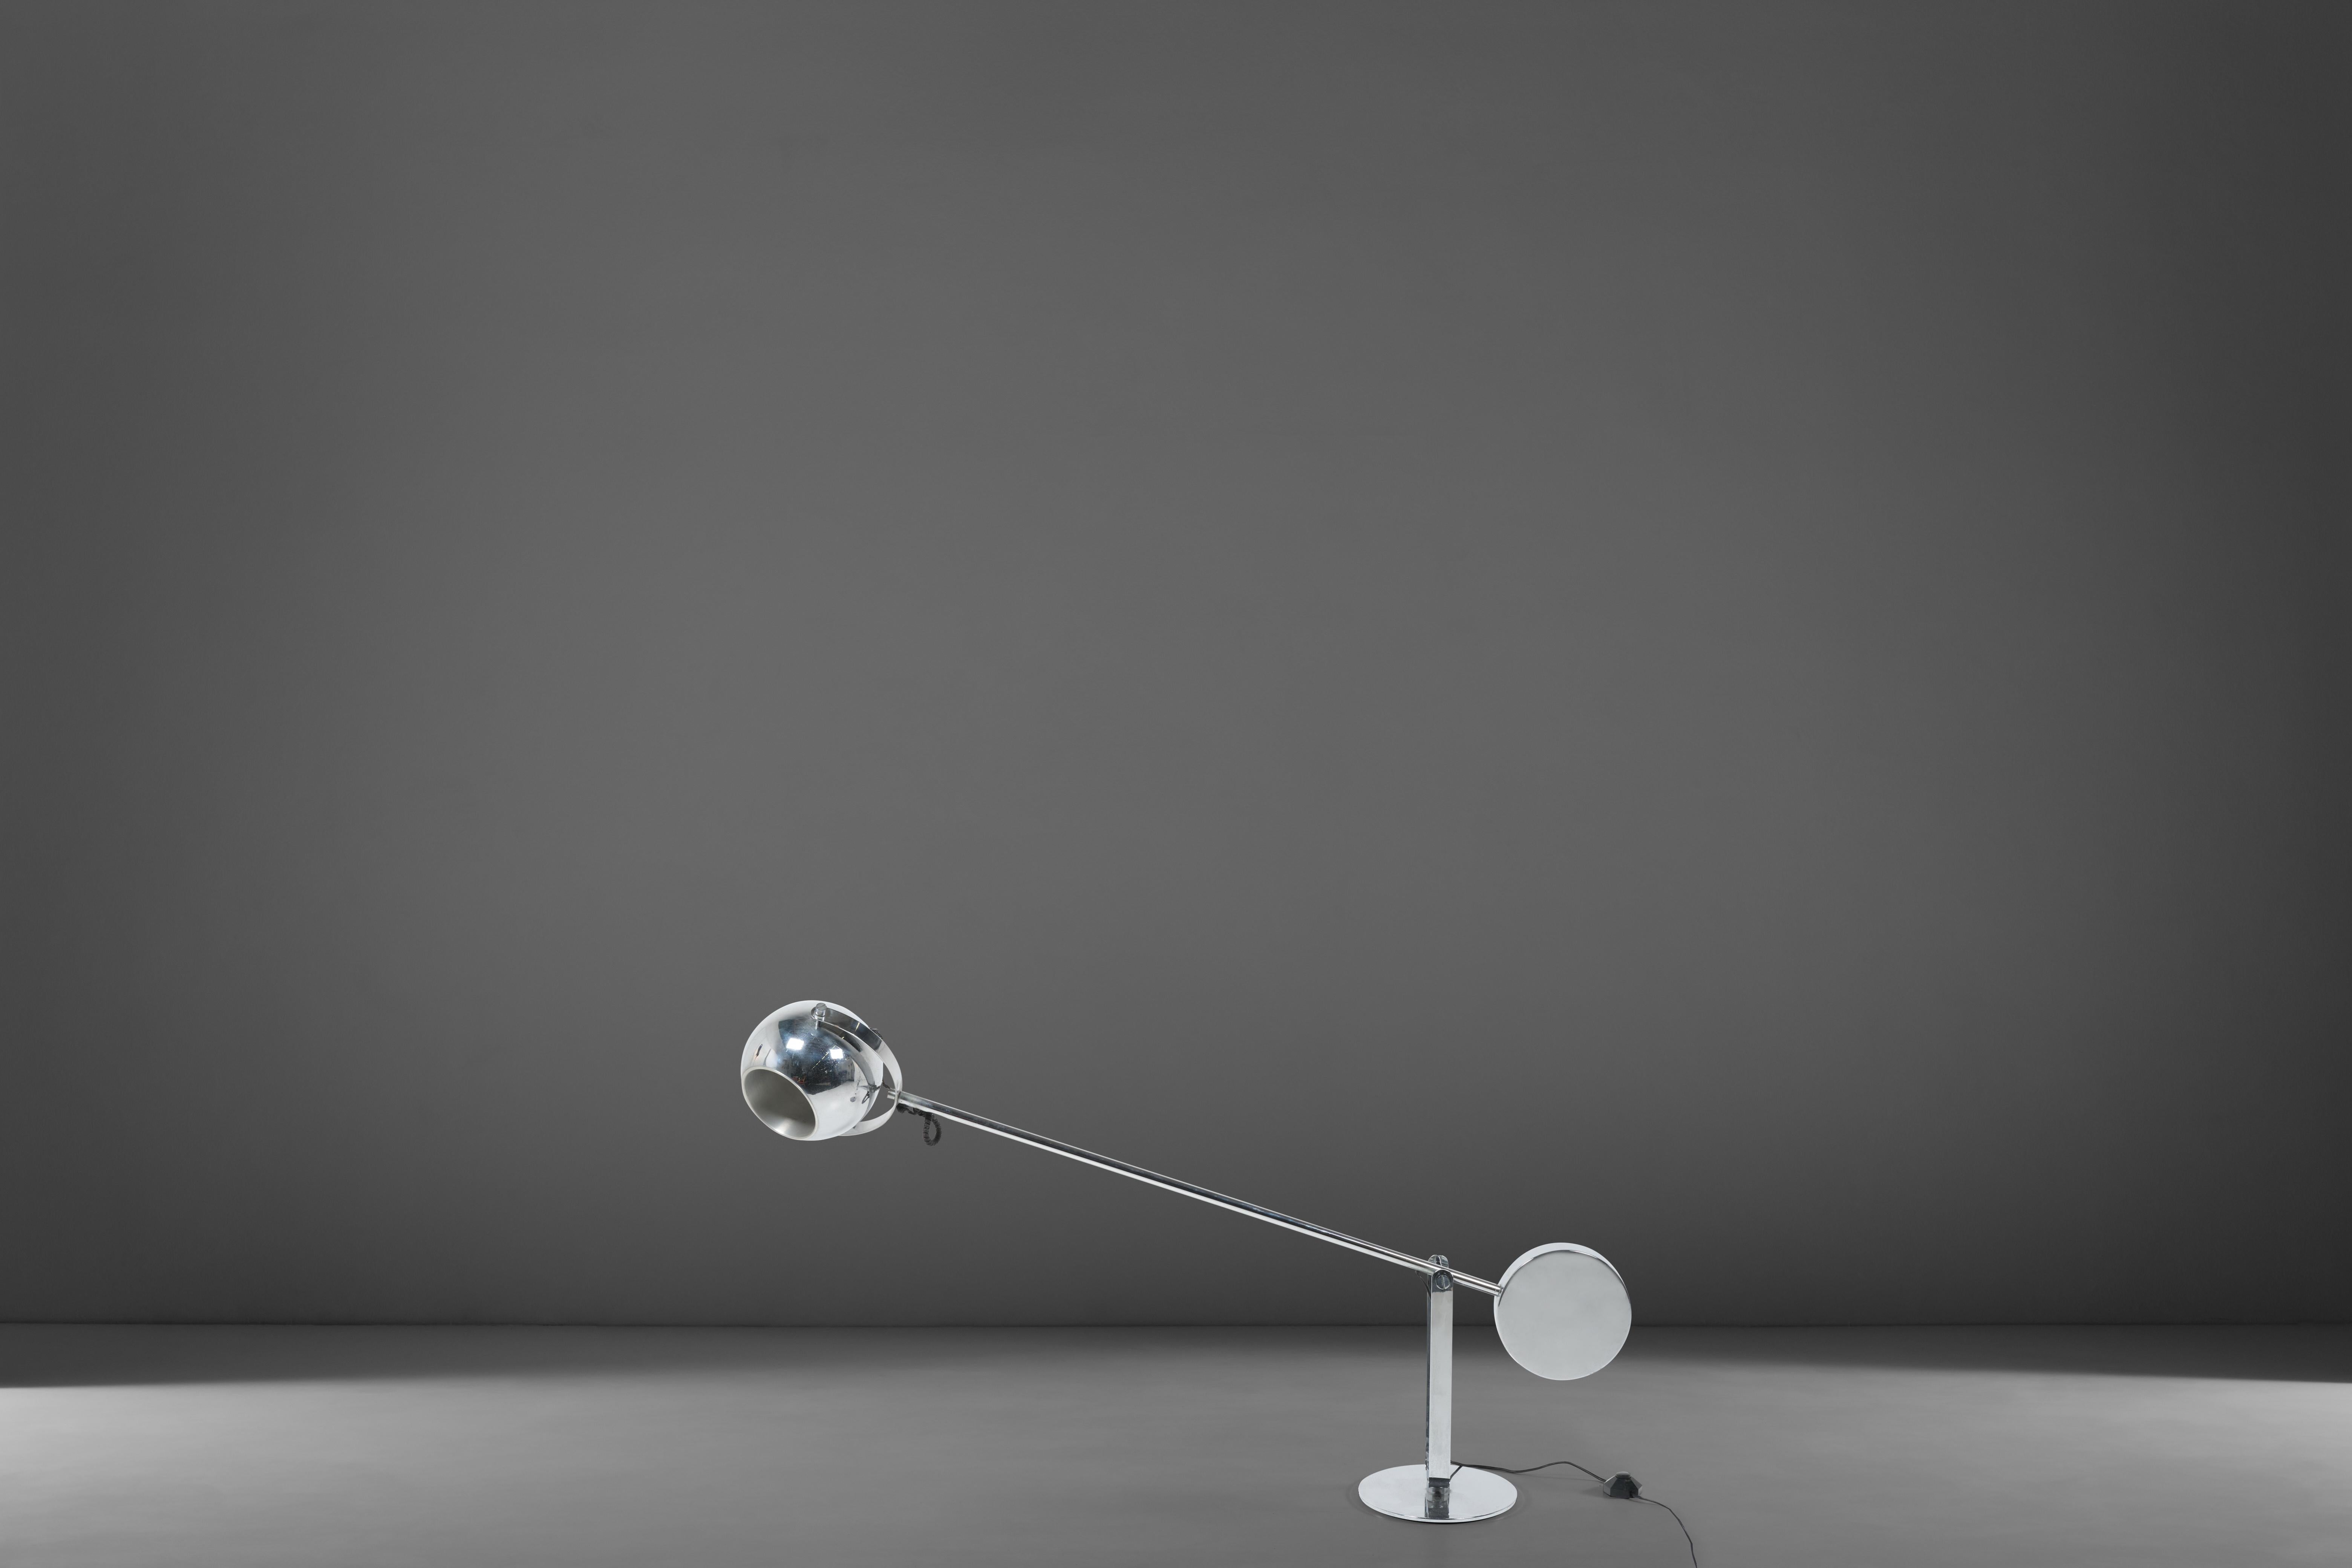 Adjustable floor lamp mode S3 designed by Paolo Tilche for Sirrah, Italy, 1972. Perfectly balanced both in terms of functionality and aesthetic thanks to its counter weight base, this wonderful floor lamp produce a nice spherical light when changed